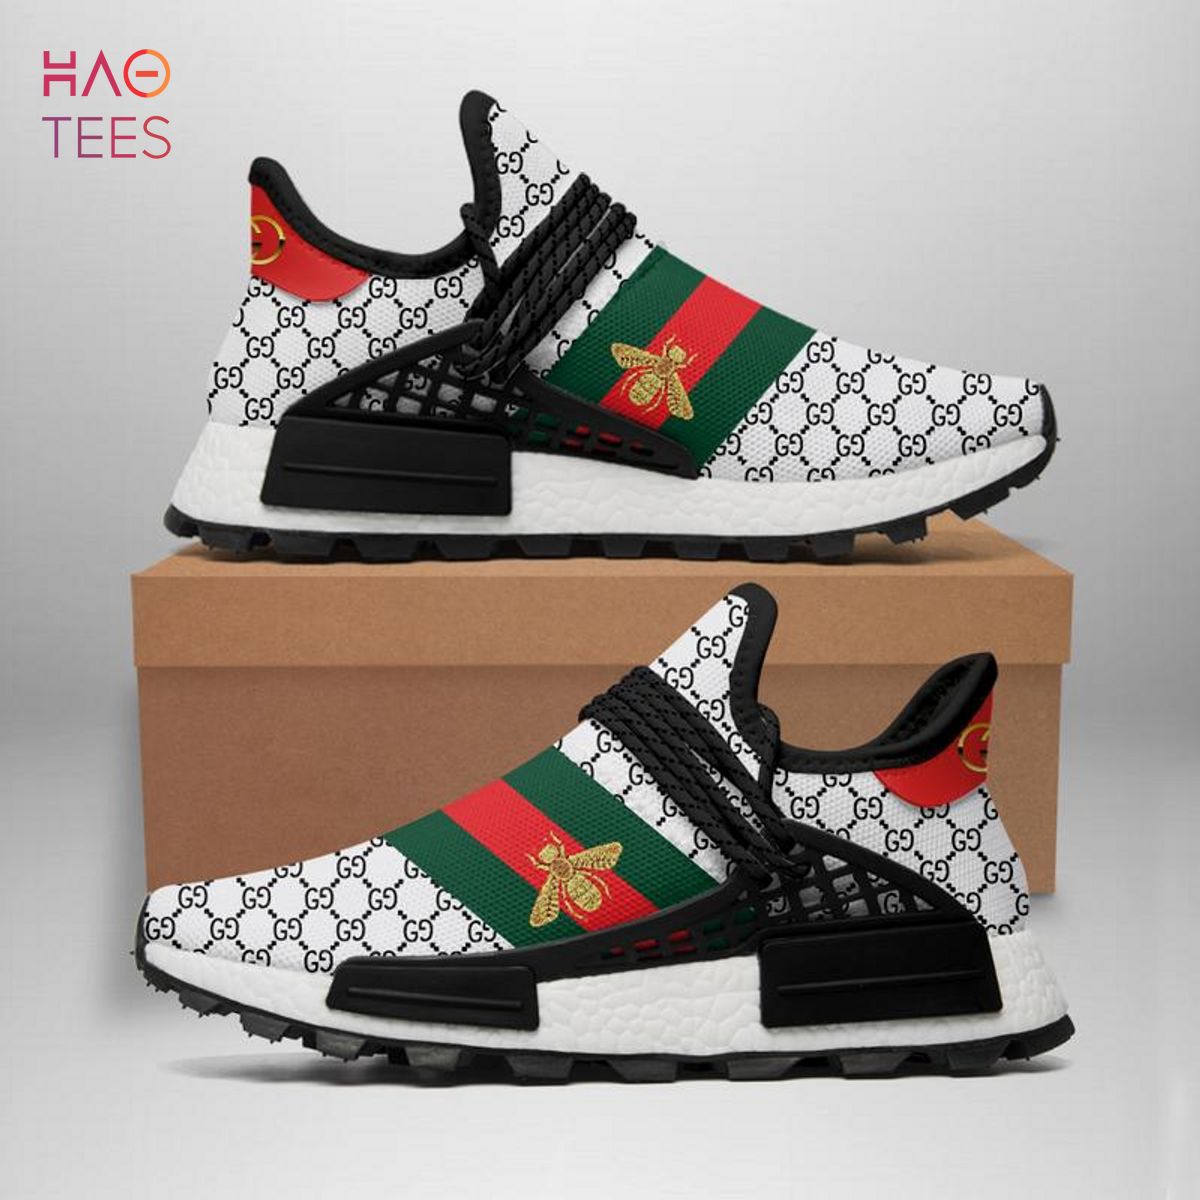 Gucci Bee NMD Human Shoes